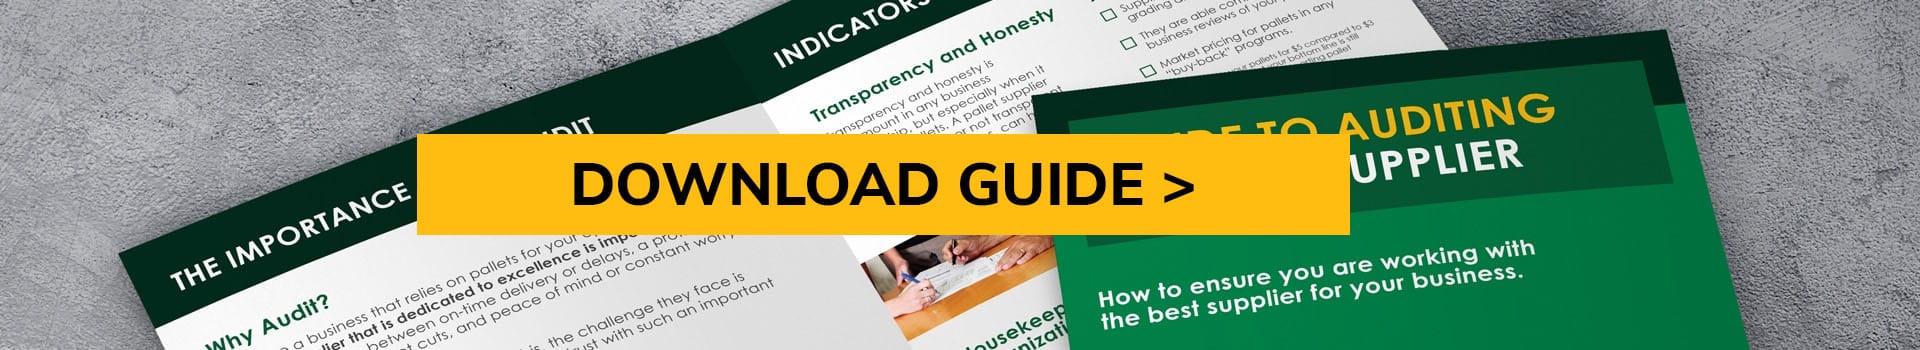 sample of pallet auditing guide with download guide button